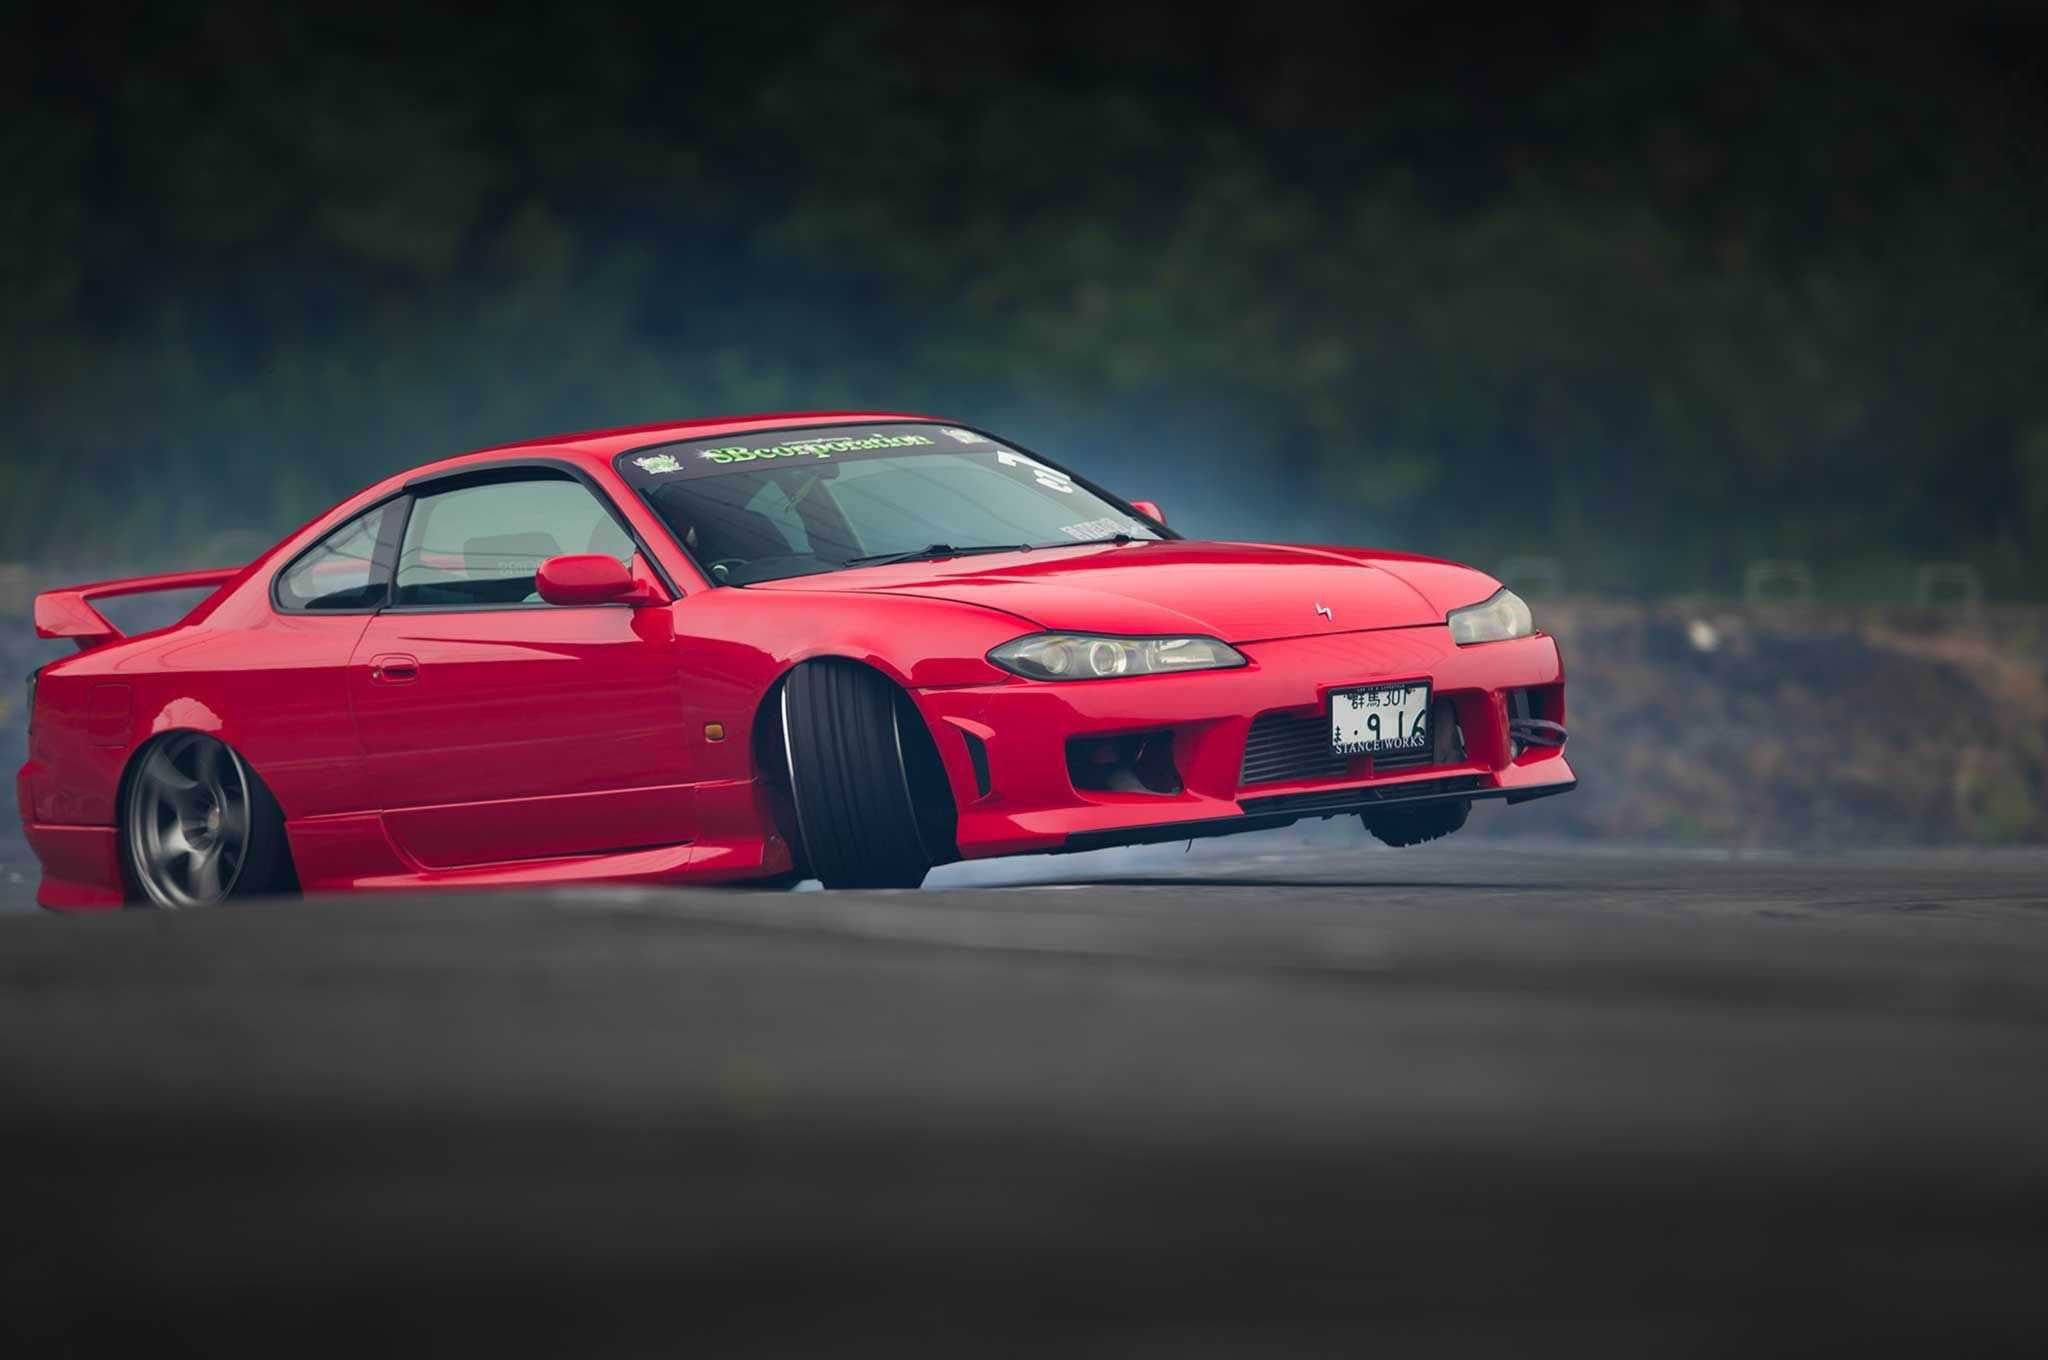 2048x1360 Nissan Silvia s15 Wallpaper Awesome Free HD Wallpapers